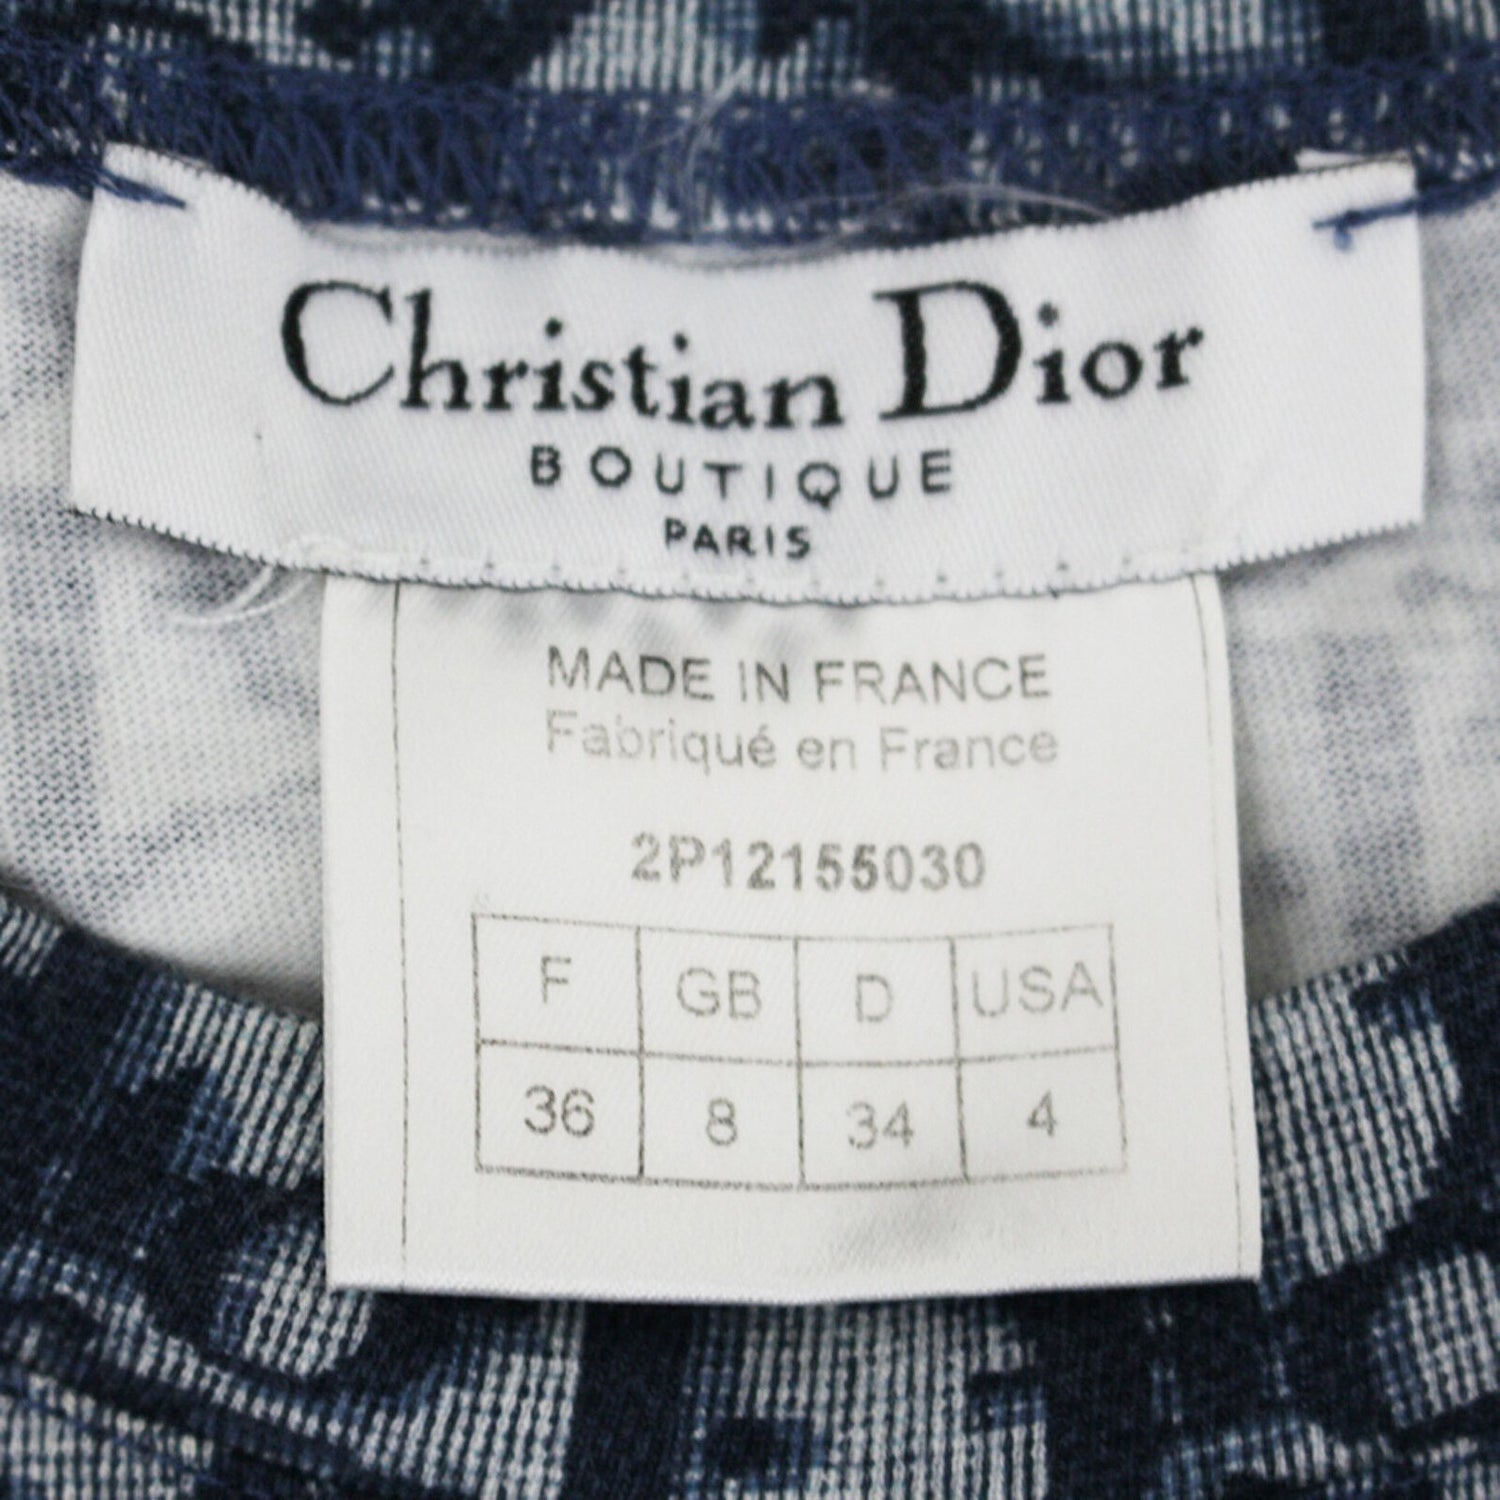 Fruit Vintage Christian Dior Navy Monogram logo trotter/oblique print tank top from the early 2000s designed by John Galliano, a Christian Dior collectors dream.